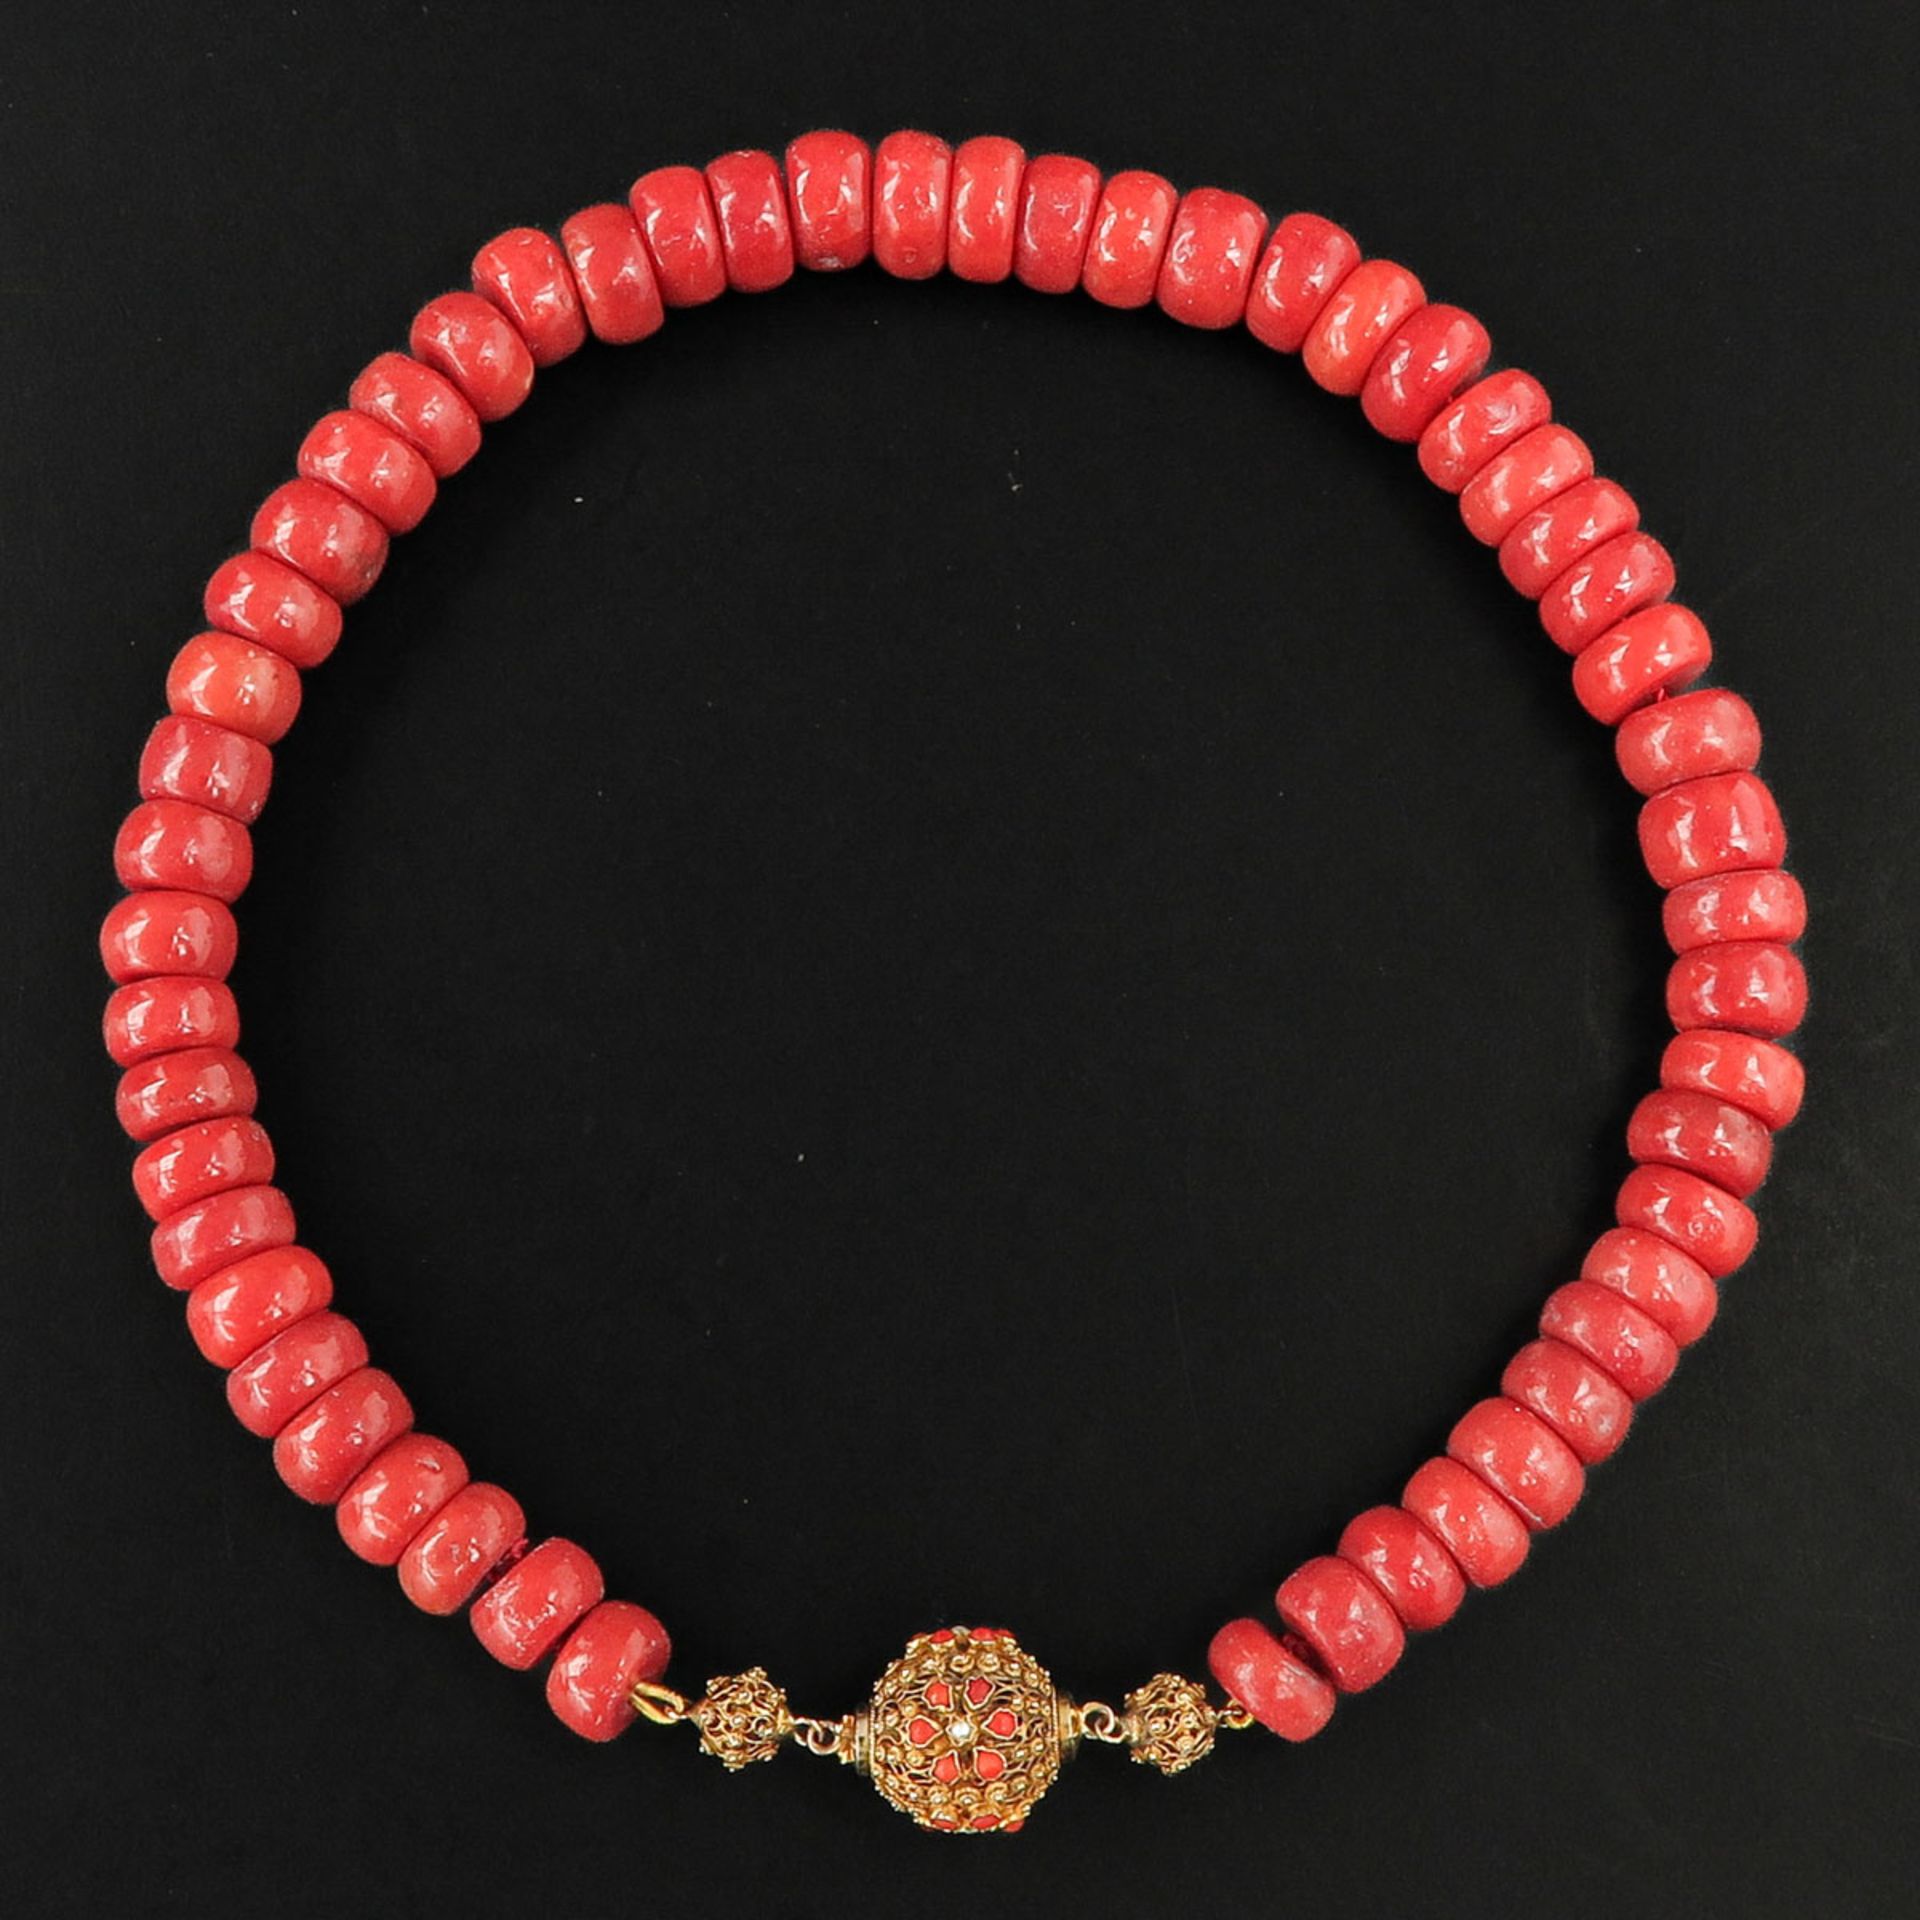 A Red Coral Necklace - Image 4 of 6